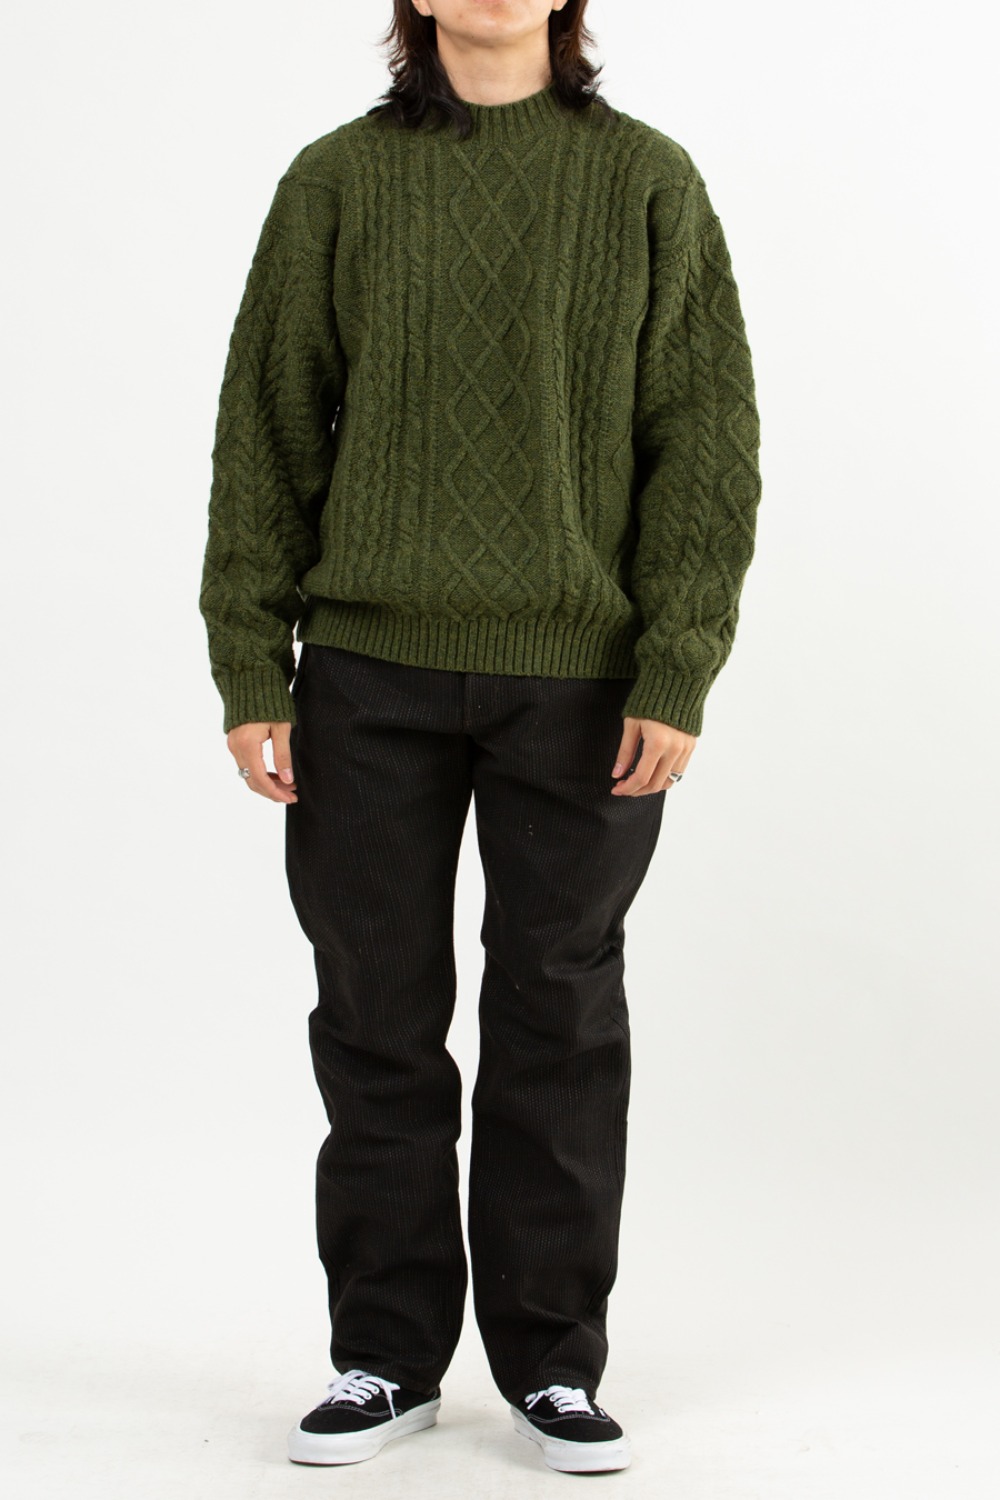 5G WOOL CABLE KNIT ELBOW-CAPITAL CREW SWEATER KHAKI